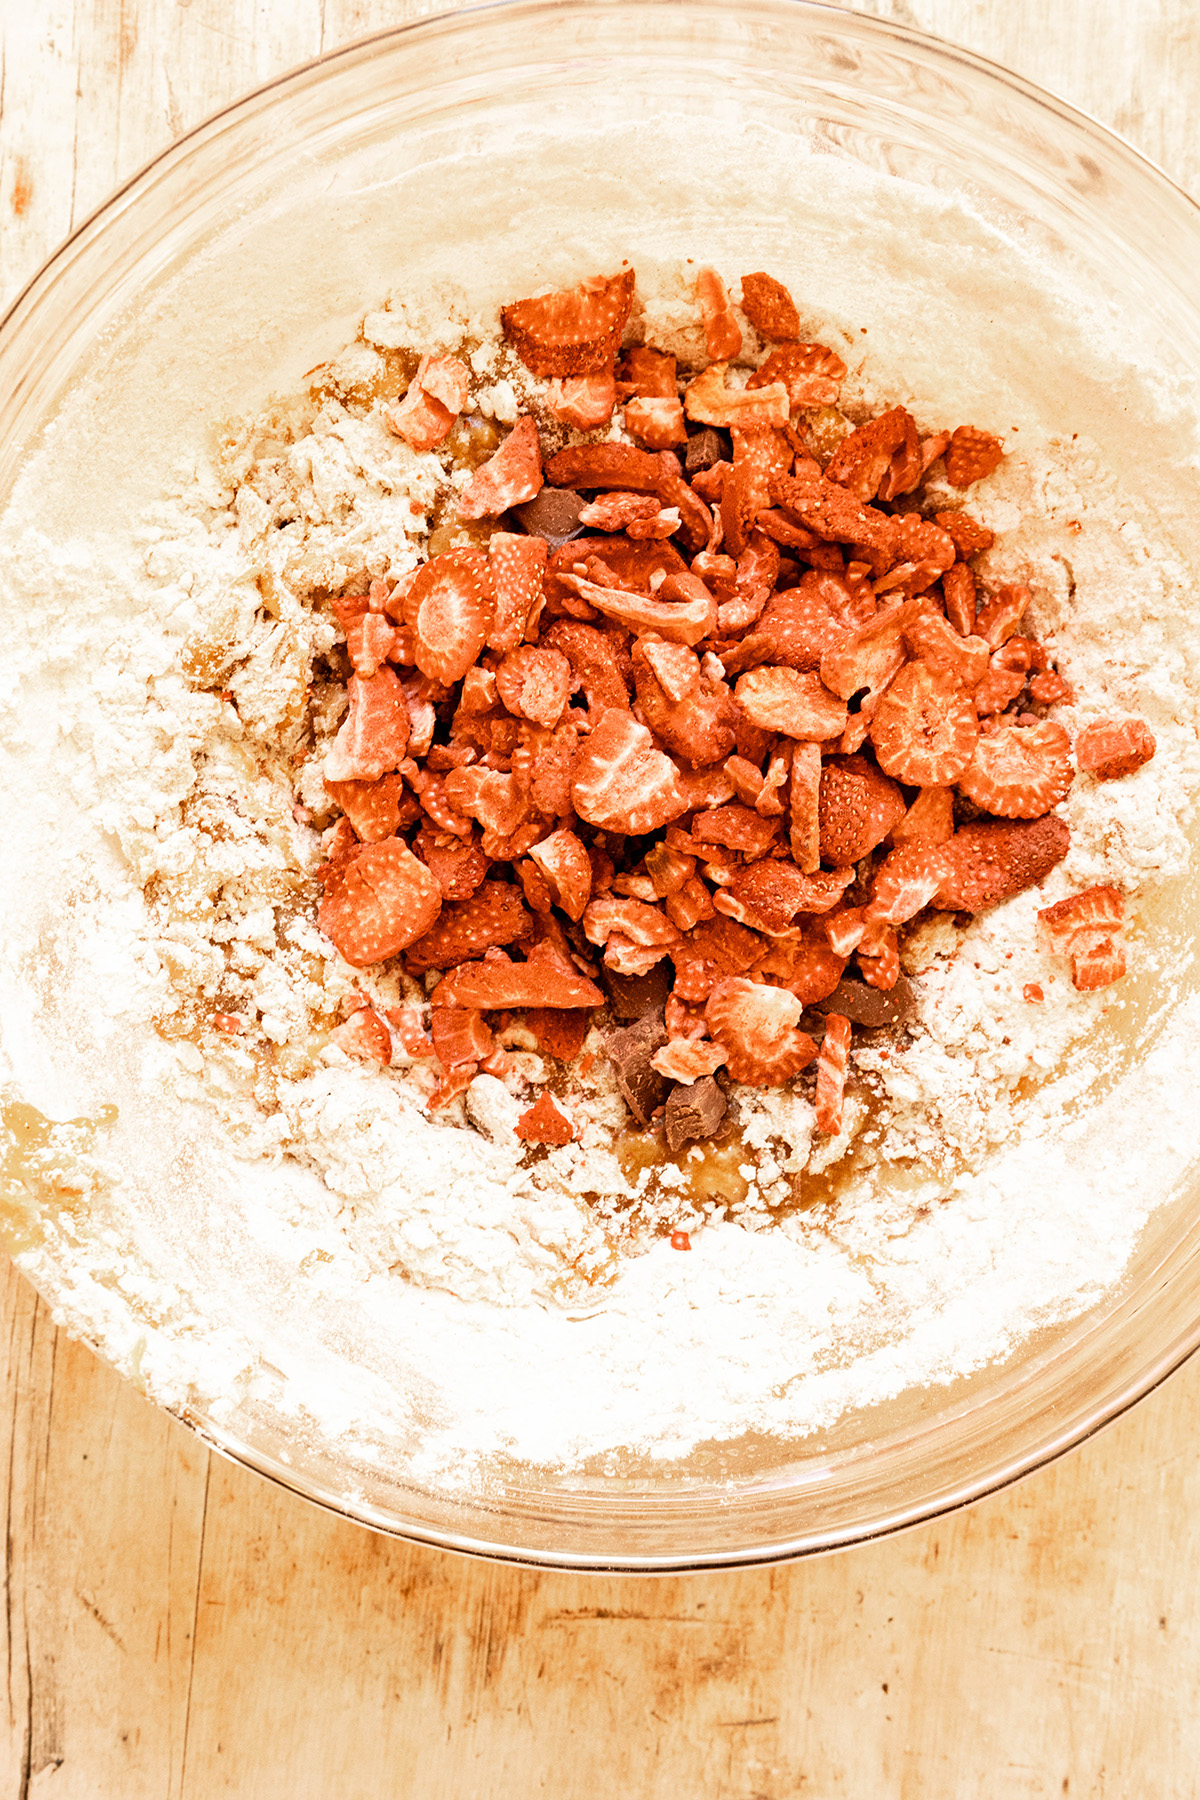 freeze dried strawberries with chocolate and flour